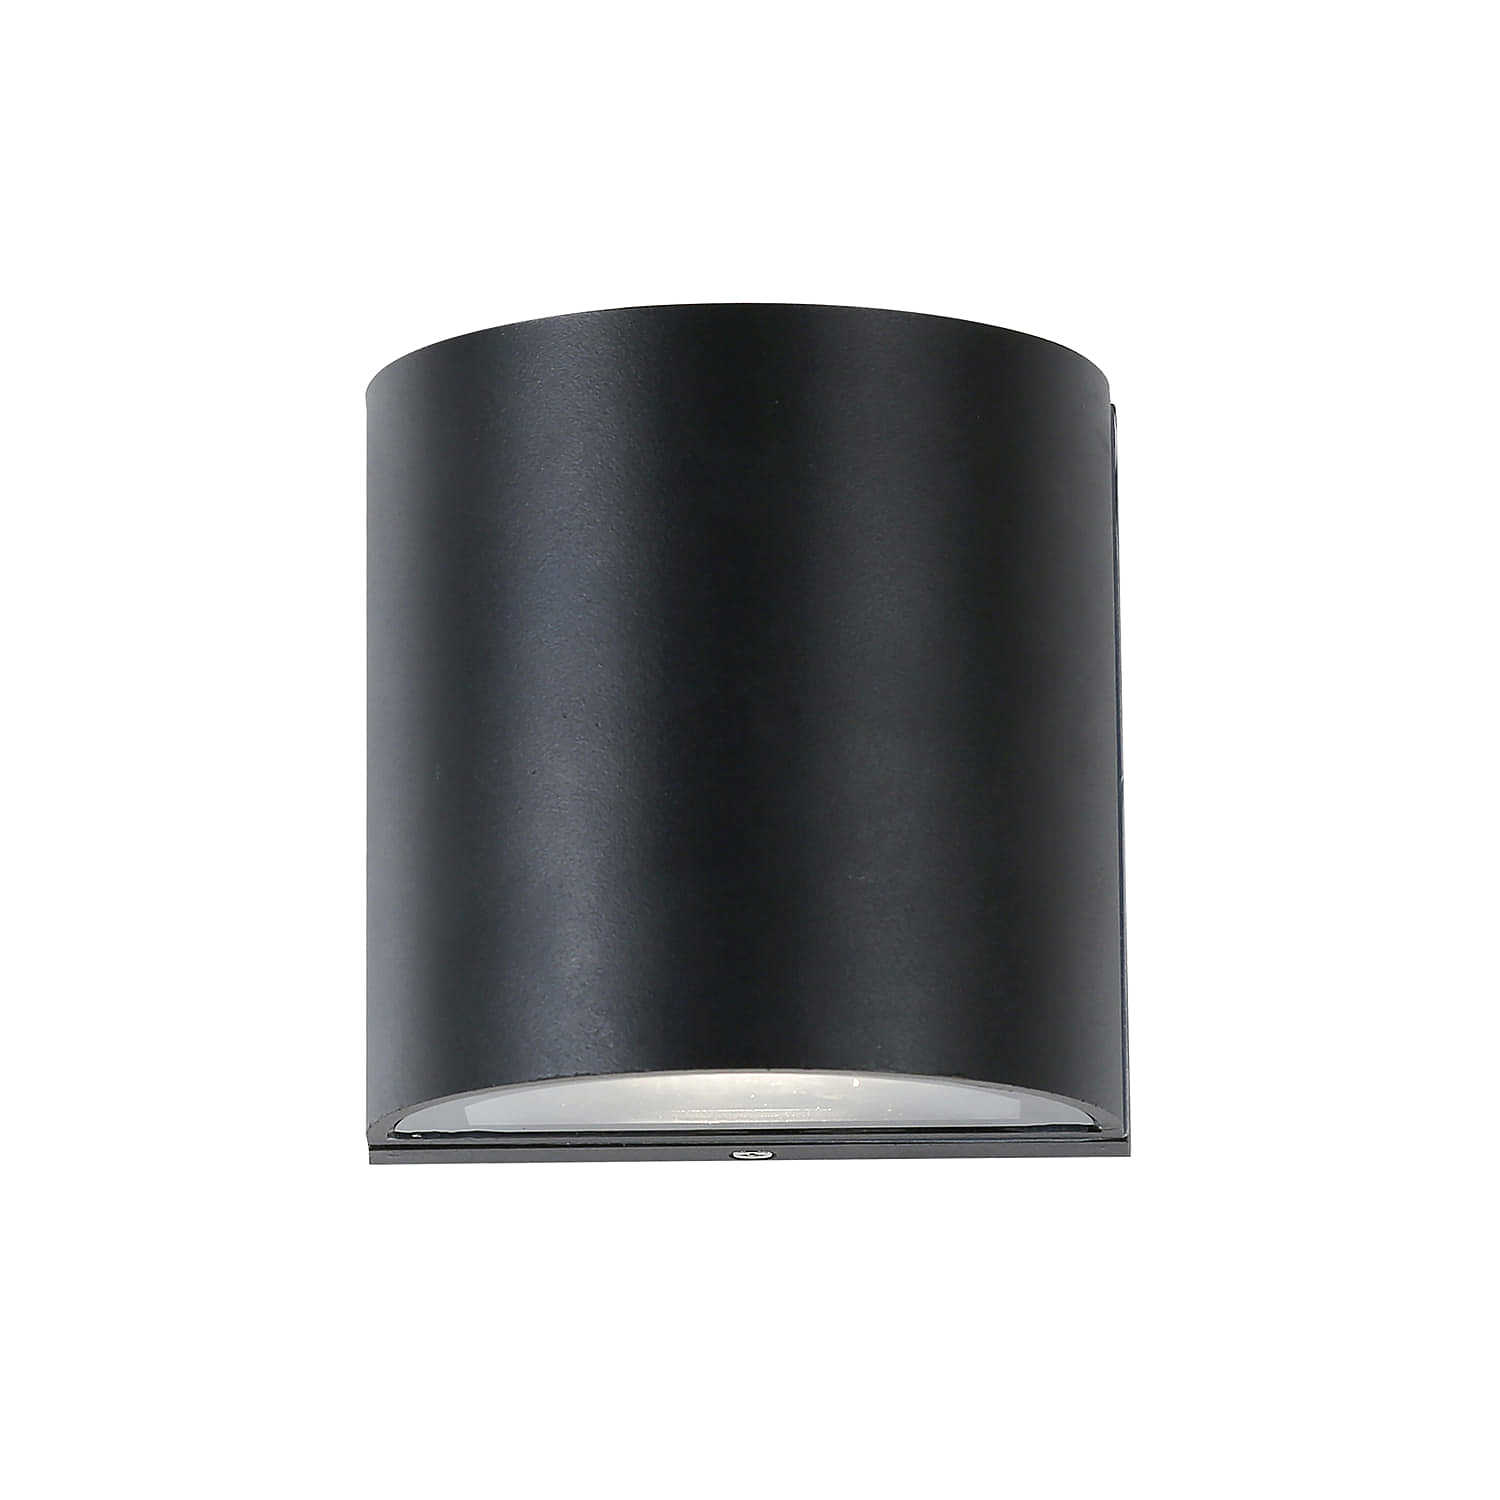  LED   Favourite Brevis 2683-2W